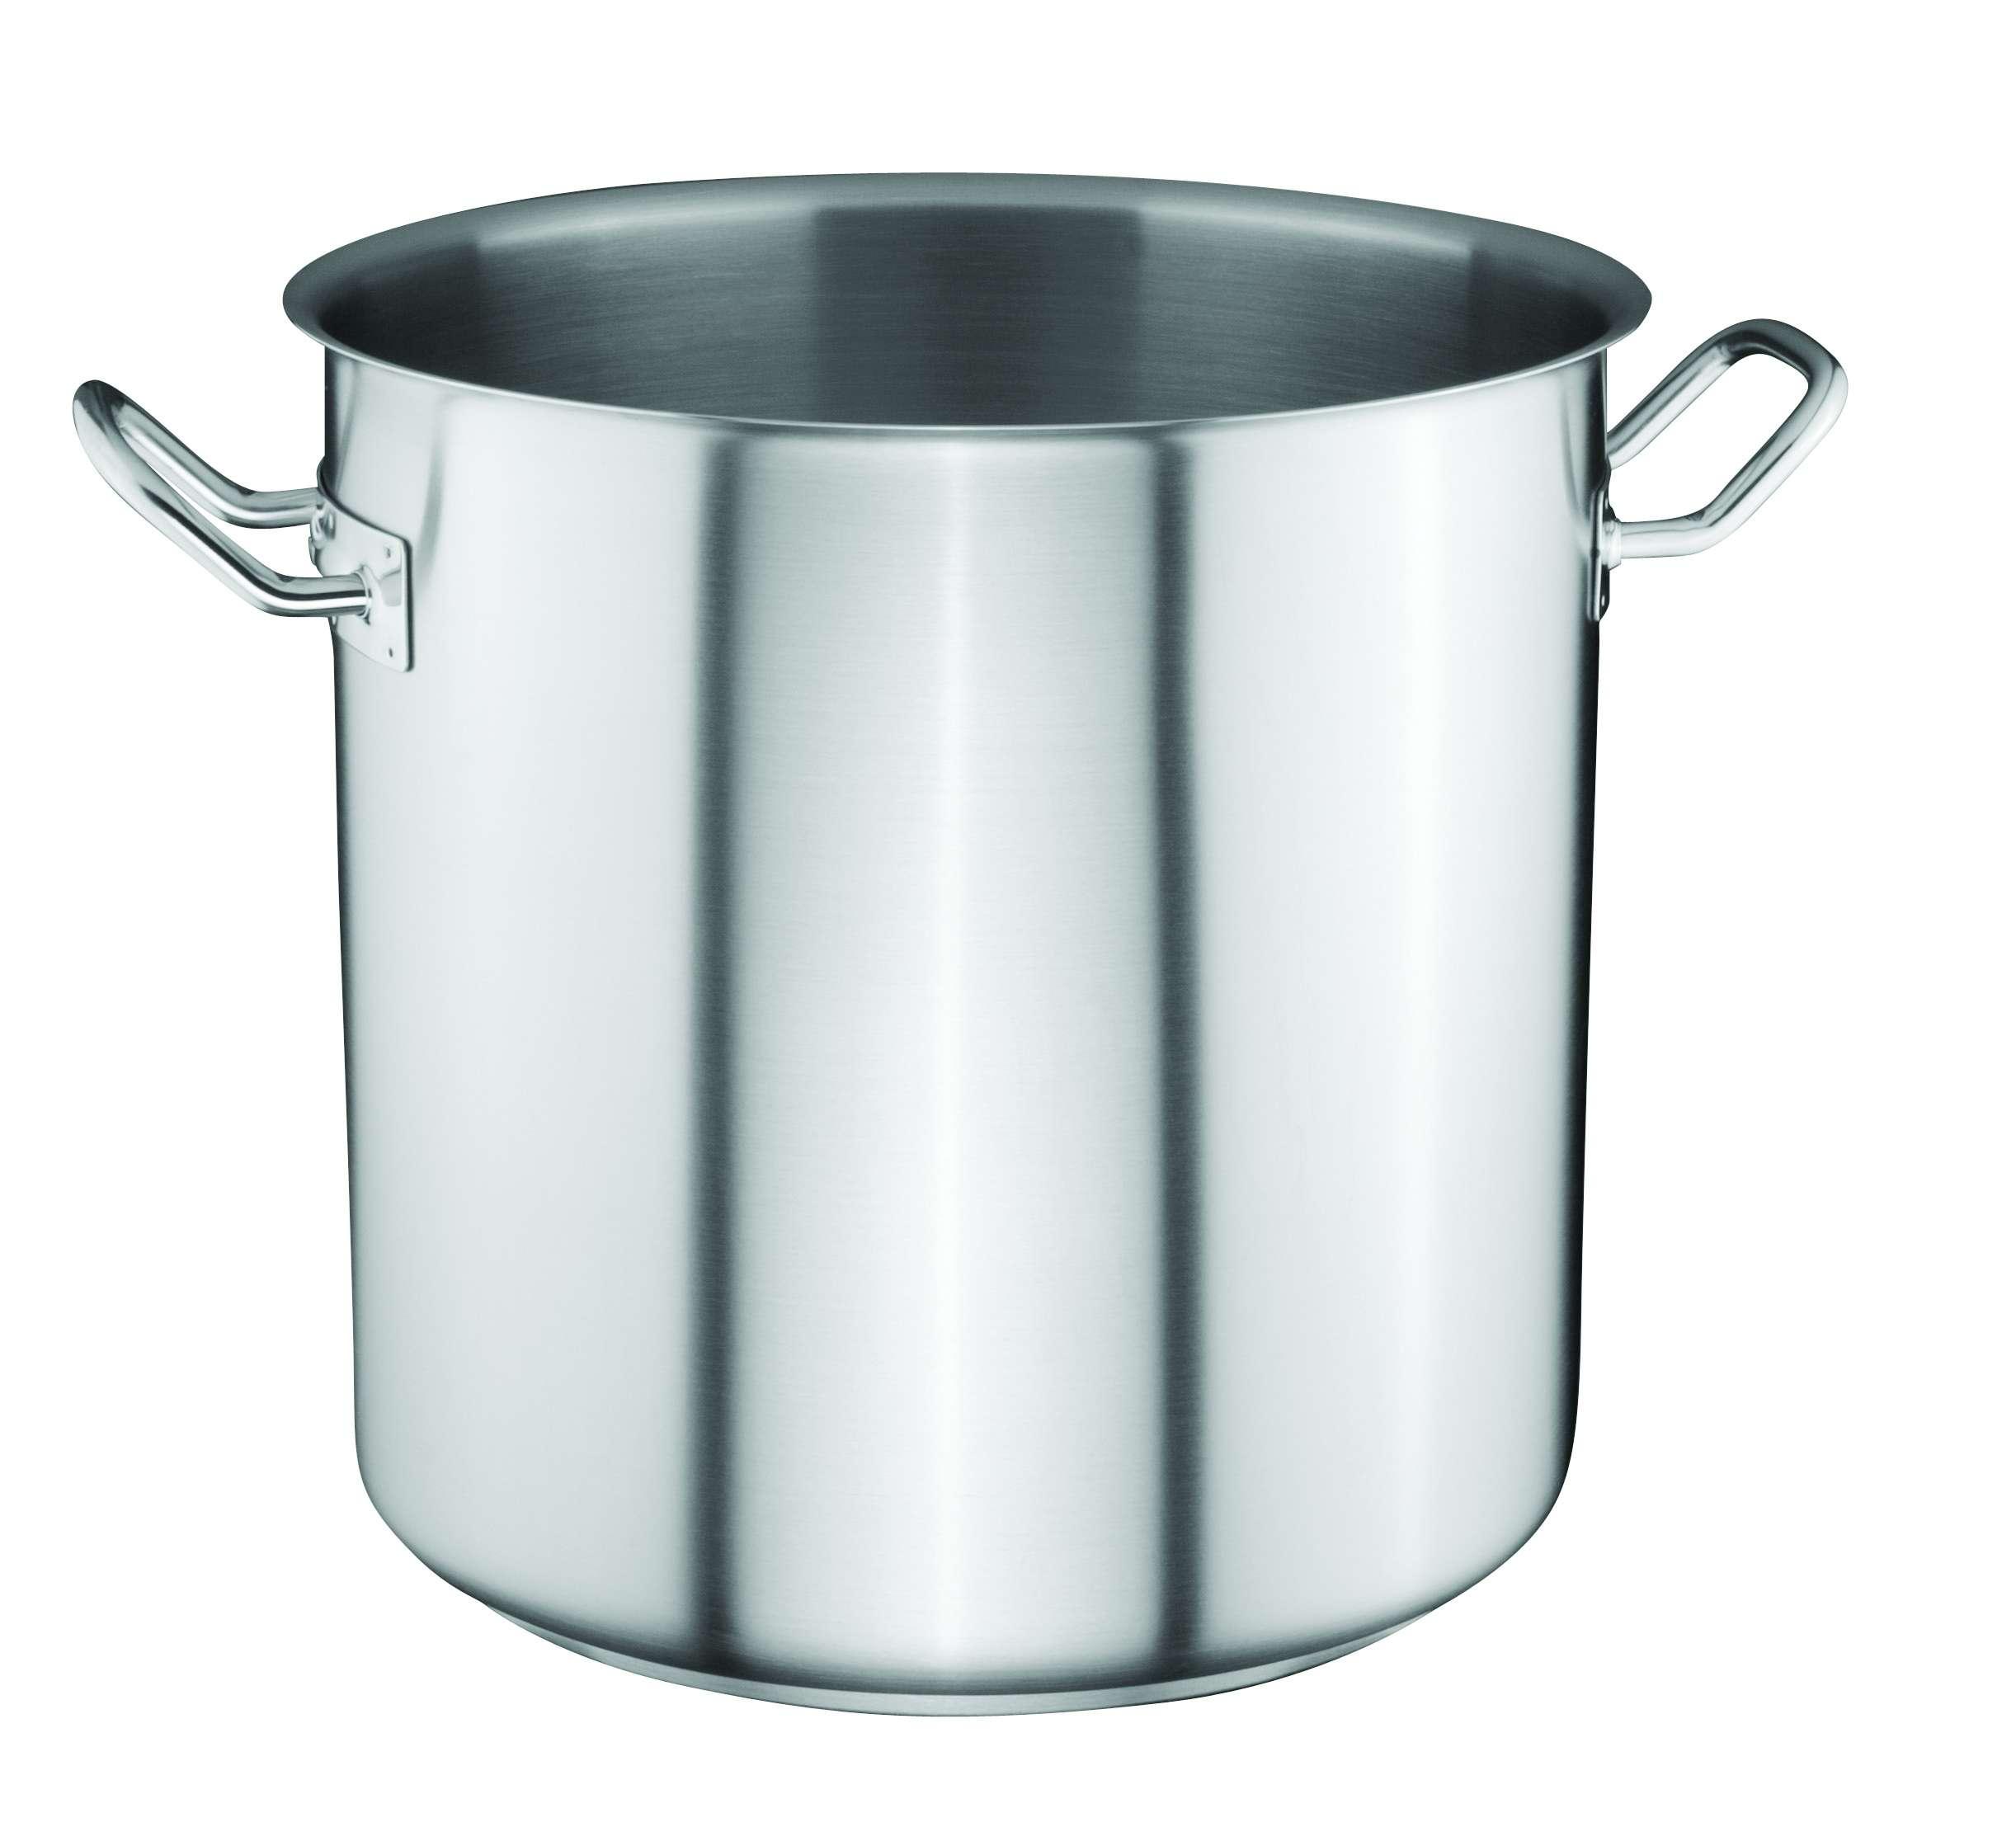 Ozti Stainless Steel Stock Pot 32 cm x 32 cm Silver Stainless Steel